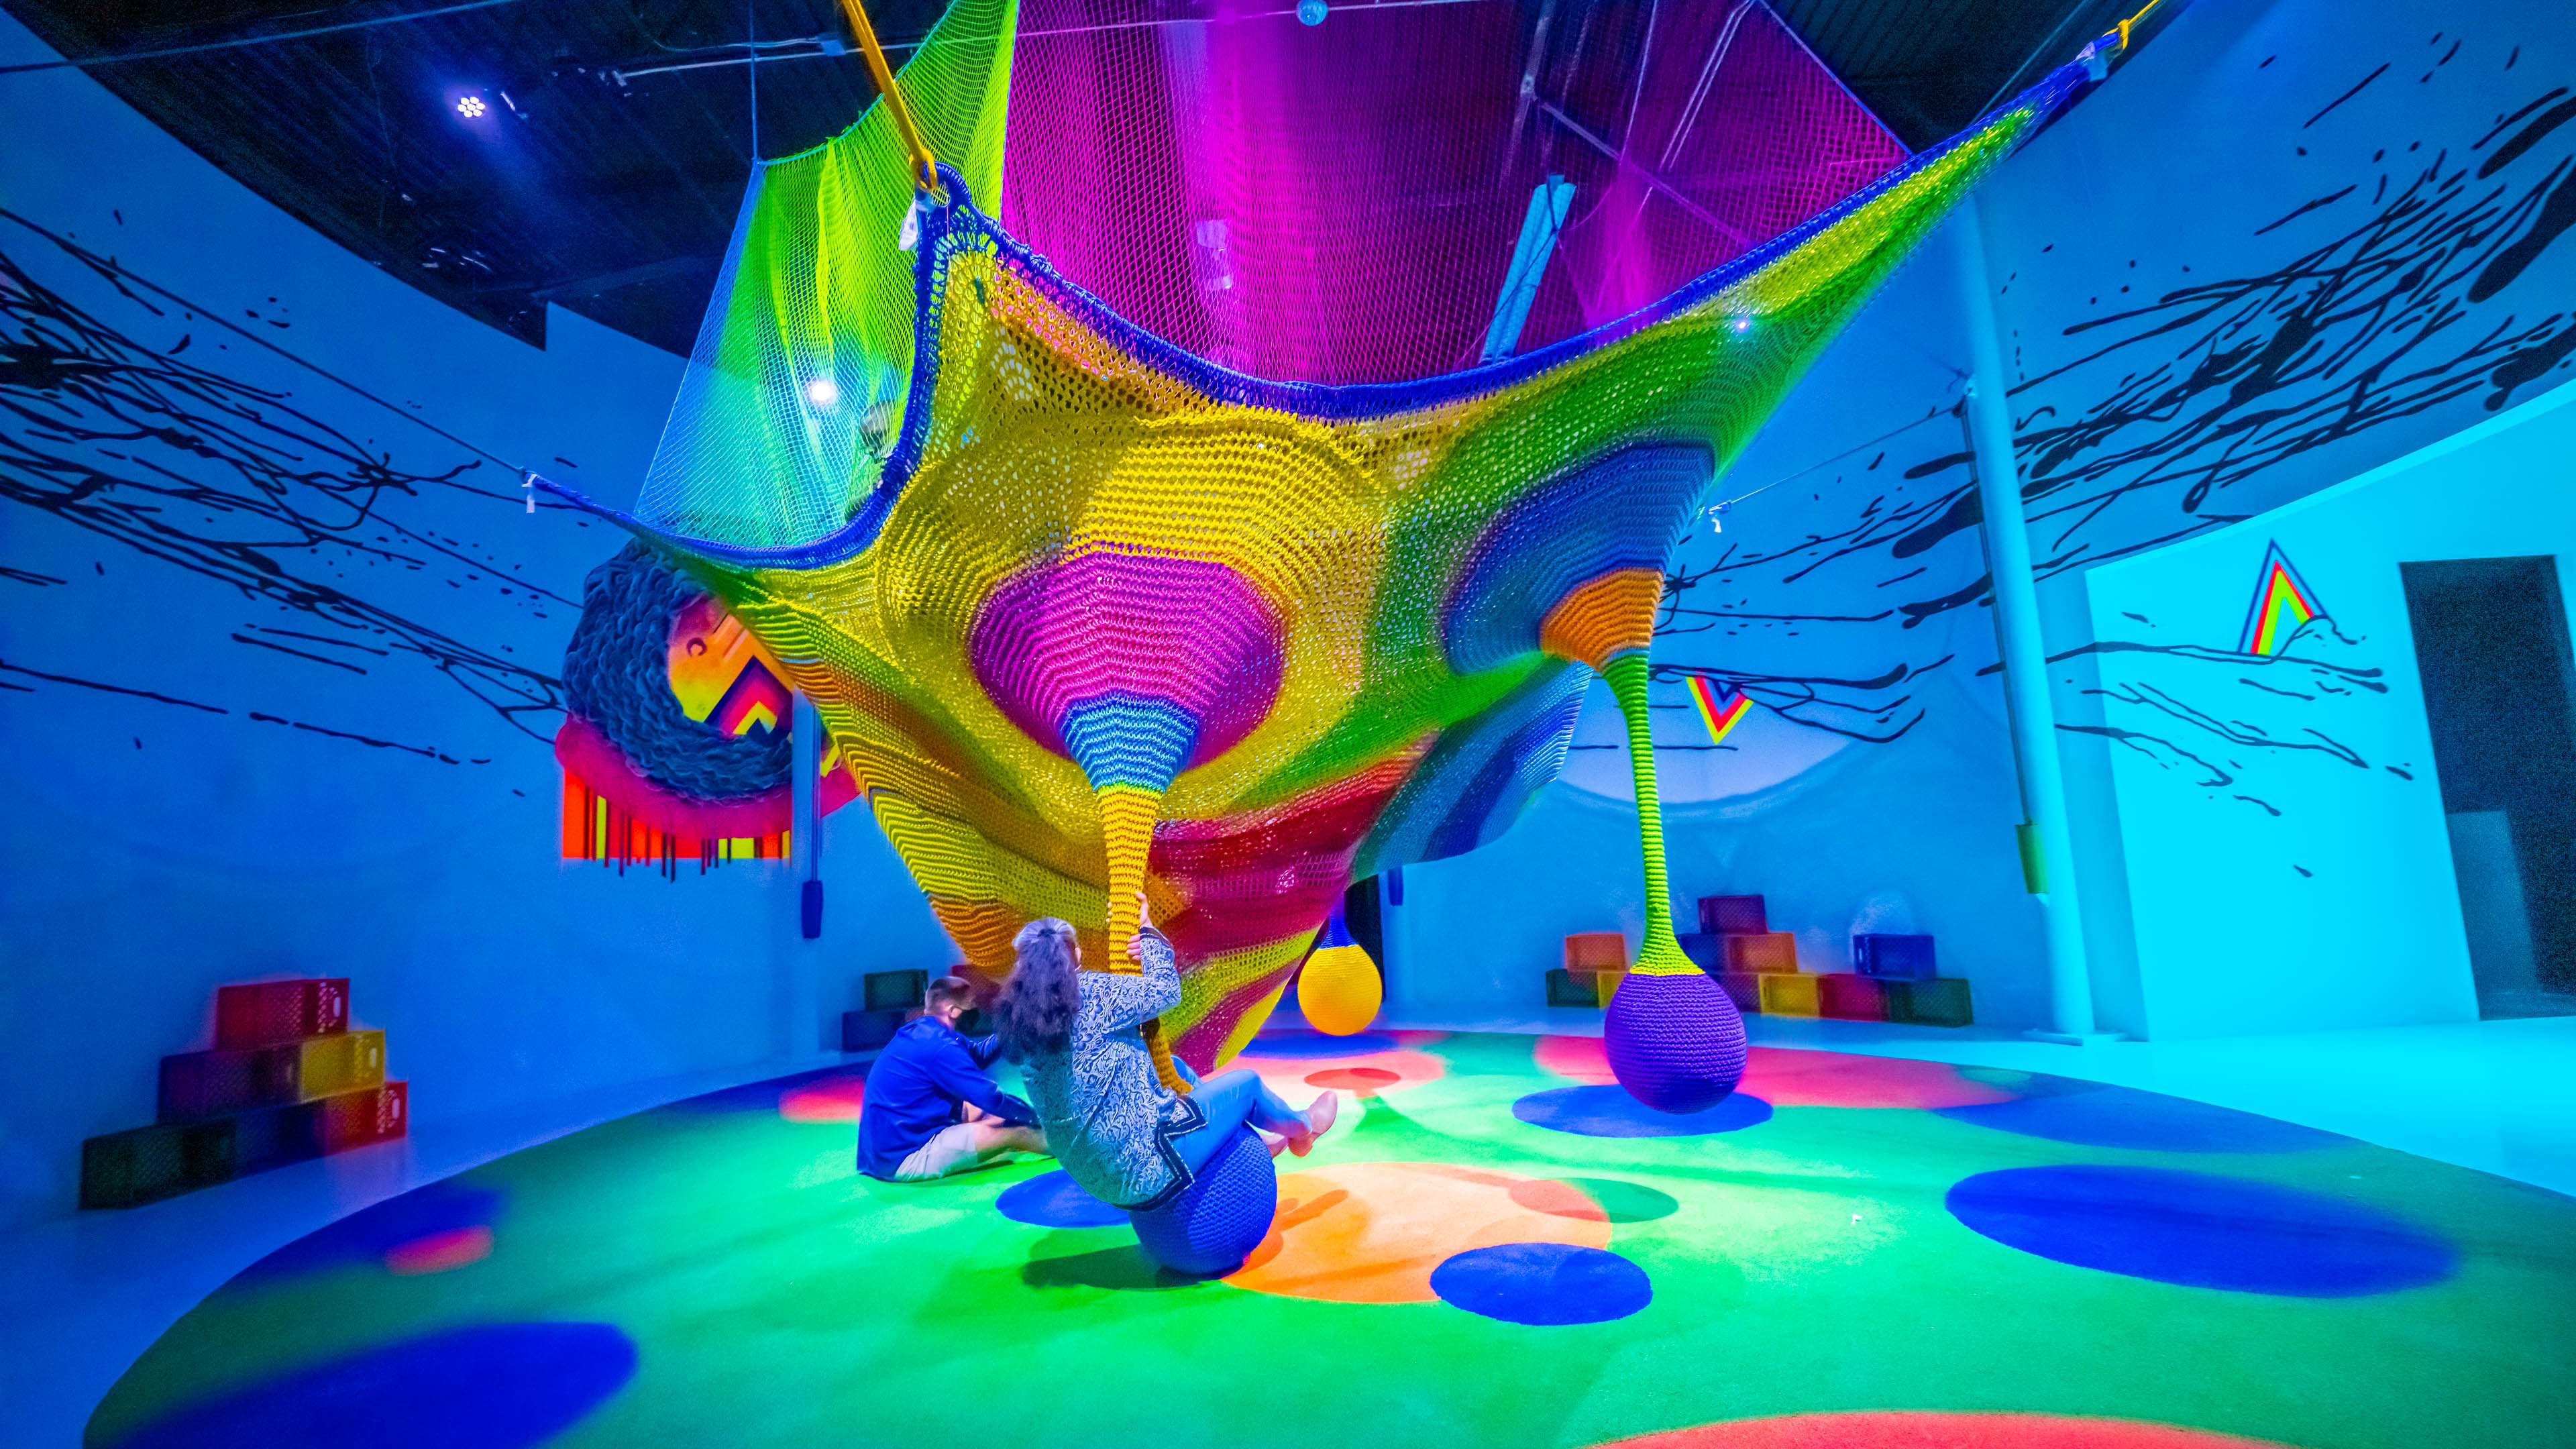 Out-of-this-world, interactive art museum touching down in Space City  Saturday